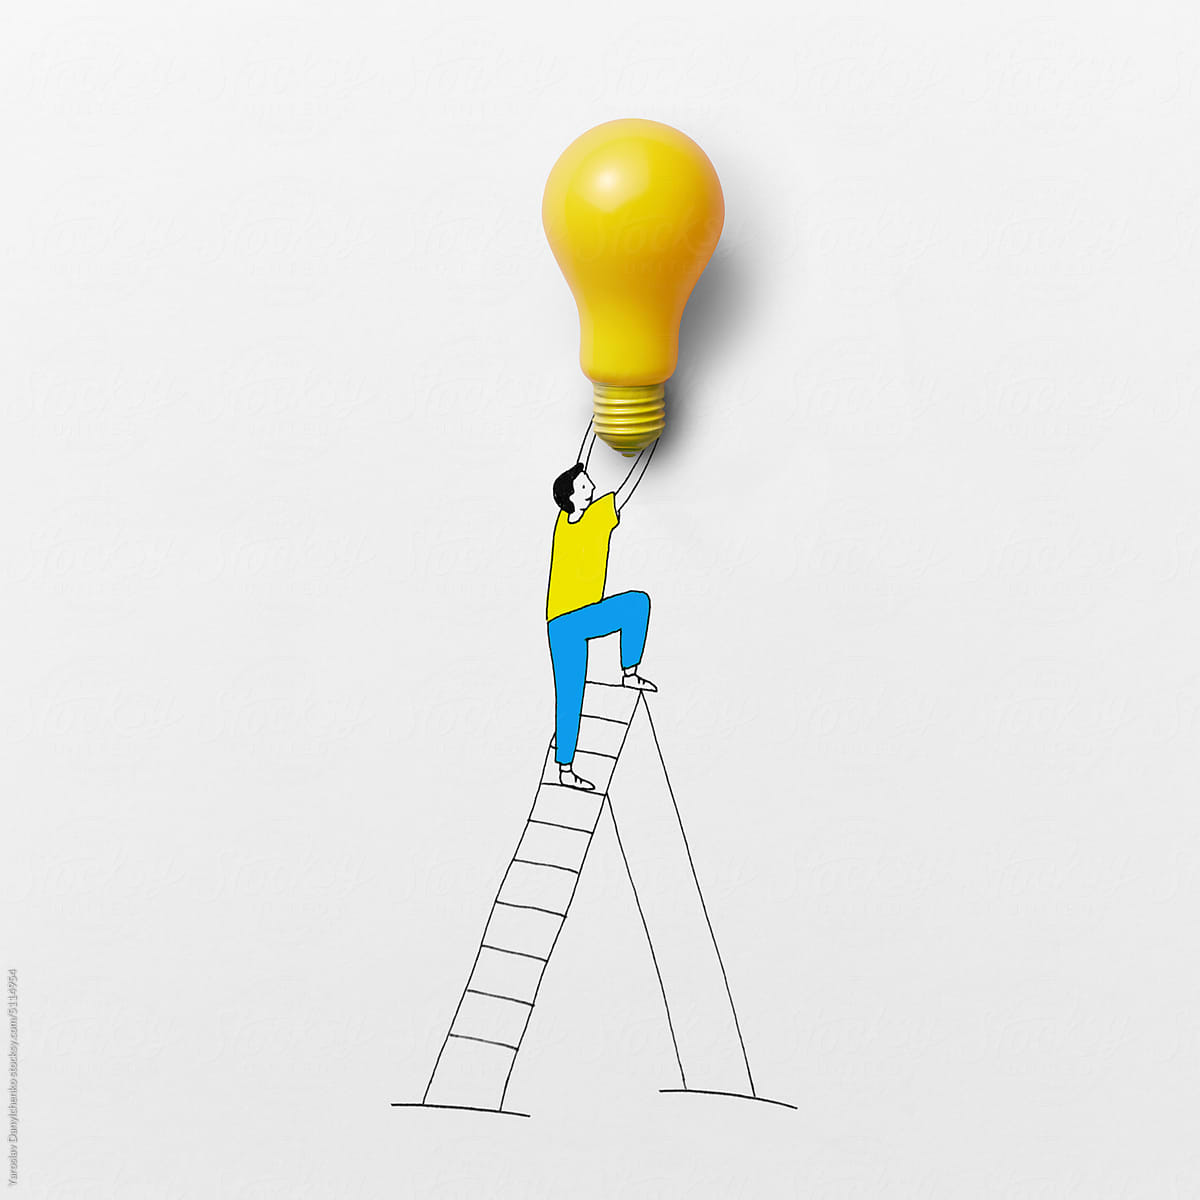 A drawing of a man on a ladder holding a lamp on a paper